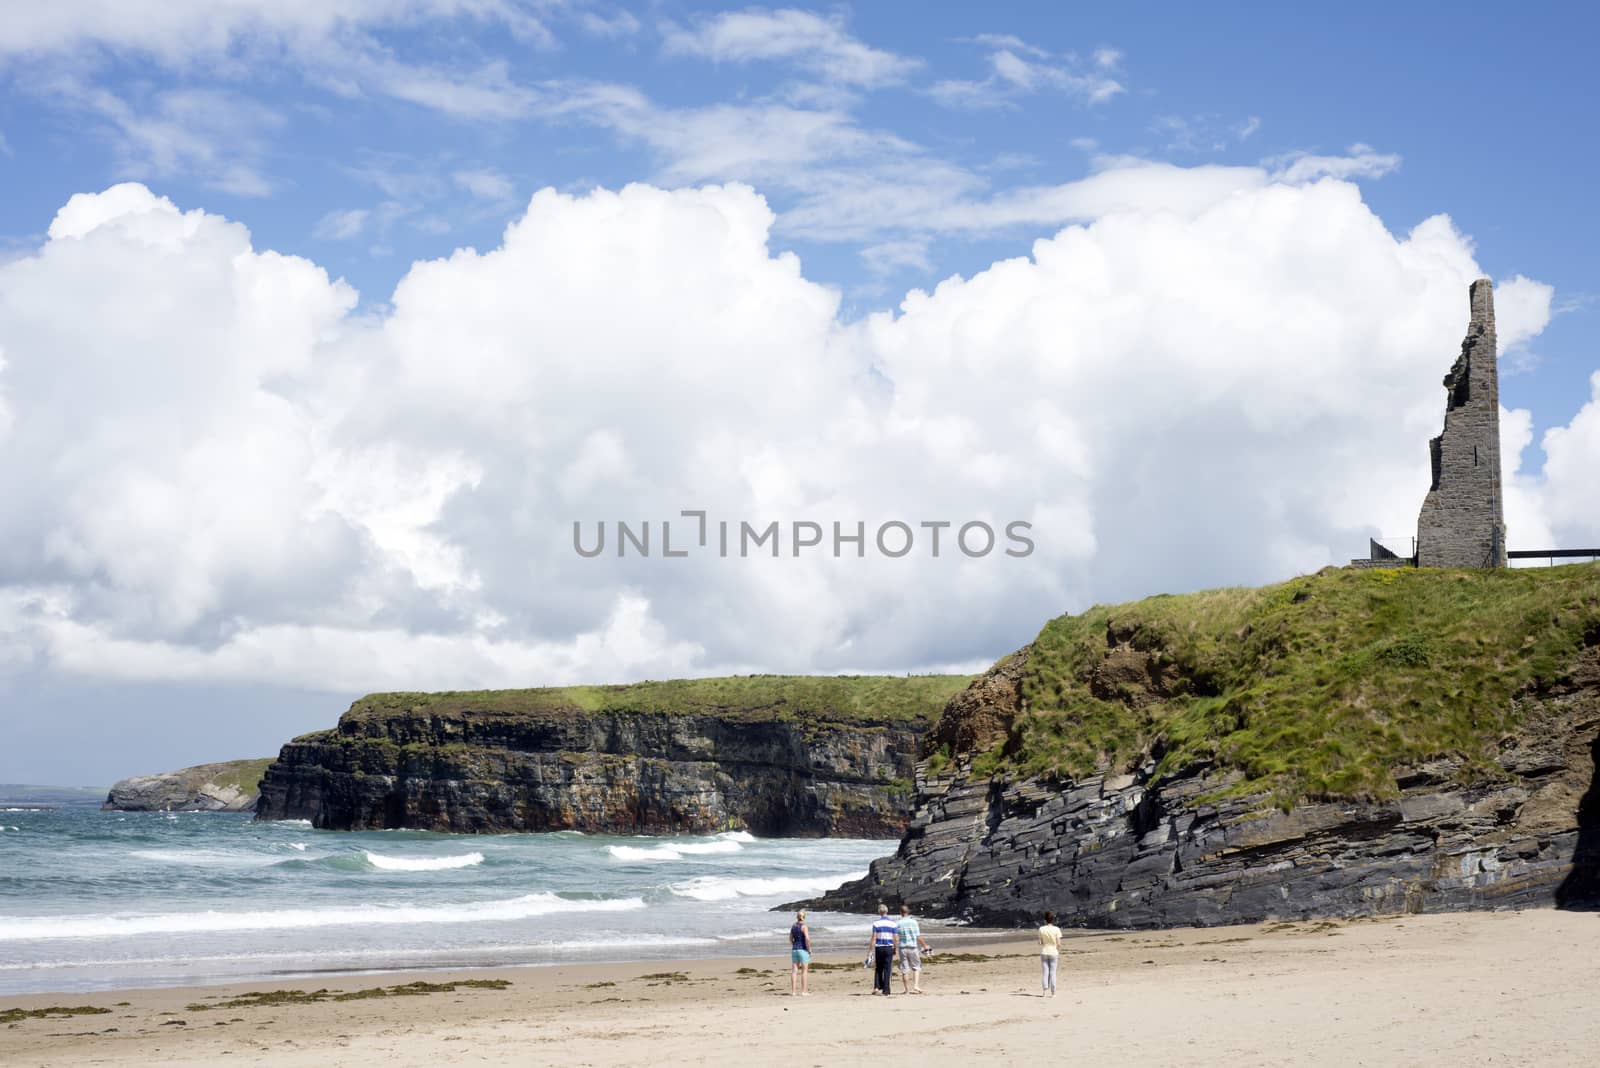 tourists walking the beach cliffs and castle on ballybunion beach county kerry ireland